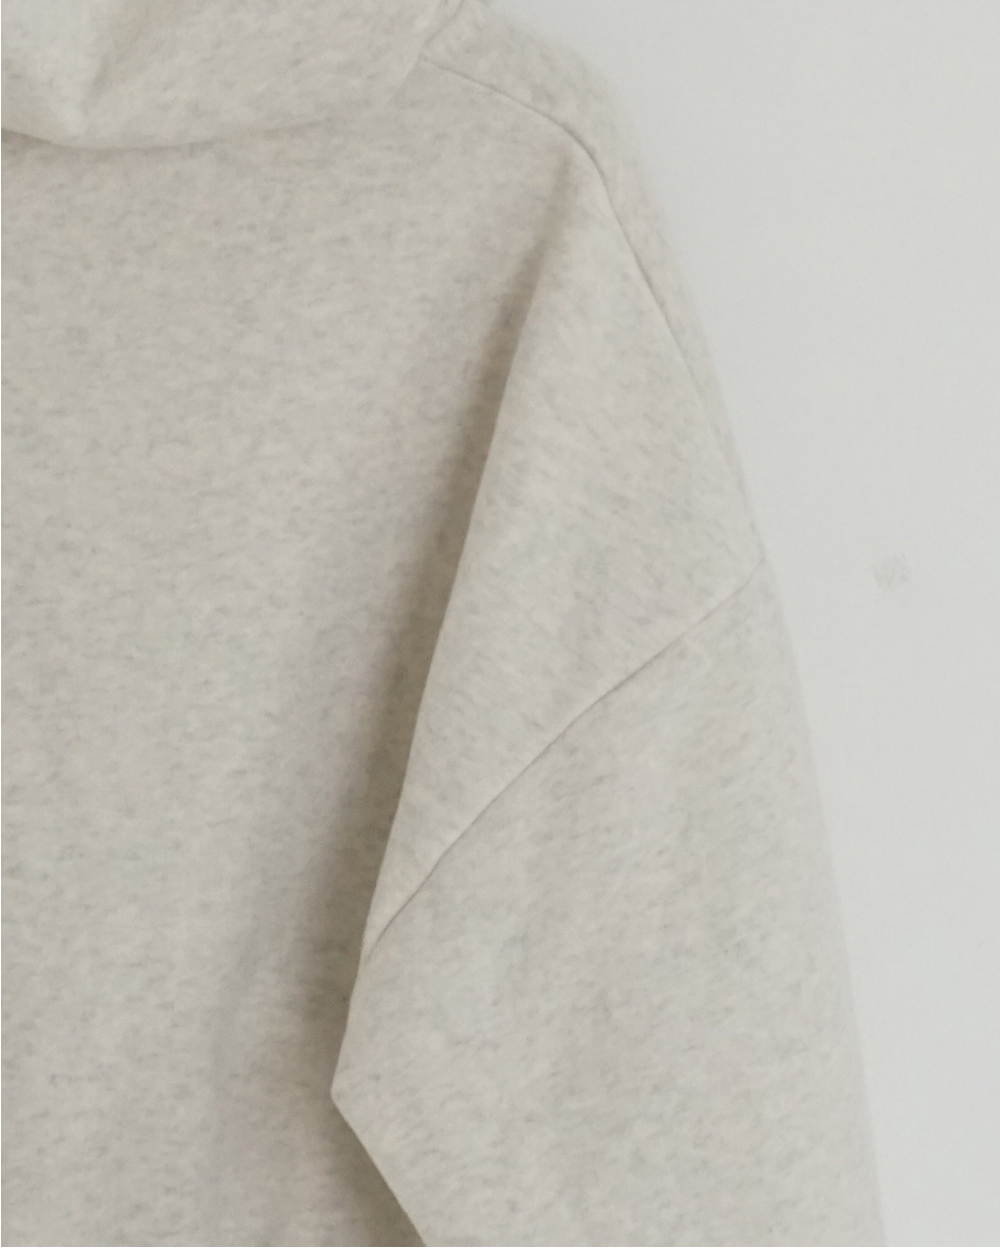 long sleeved tee detail image-S1L6